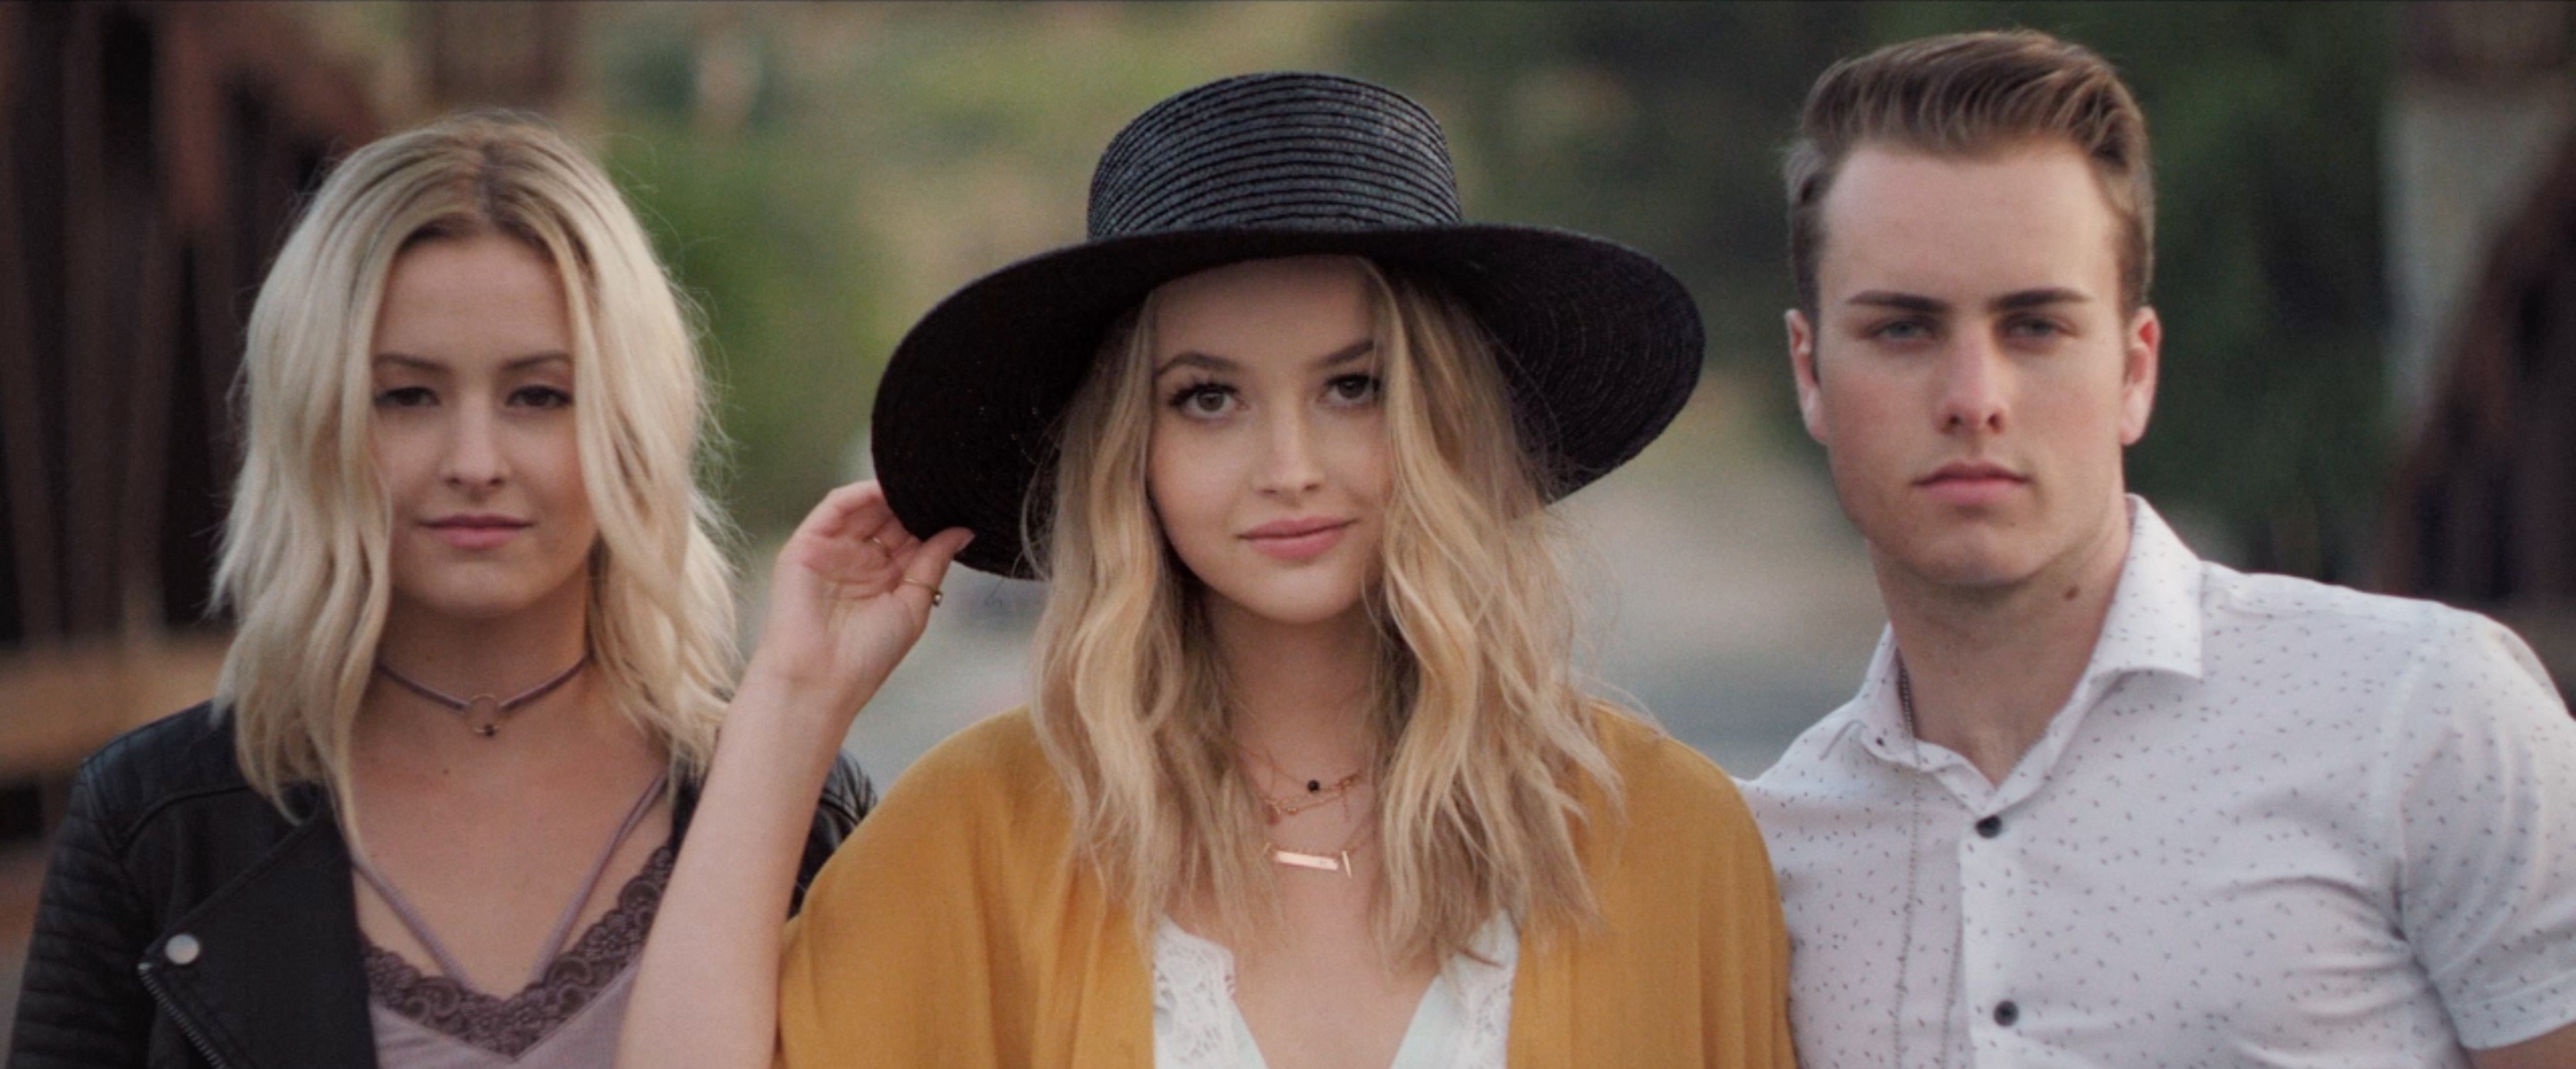 The Music Video for Temecula Road’s “Hoping” is Finally Here